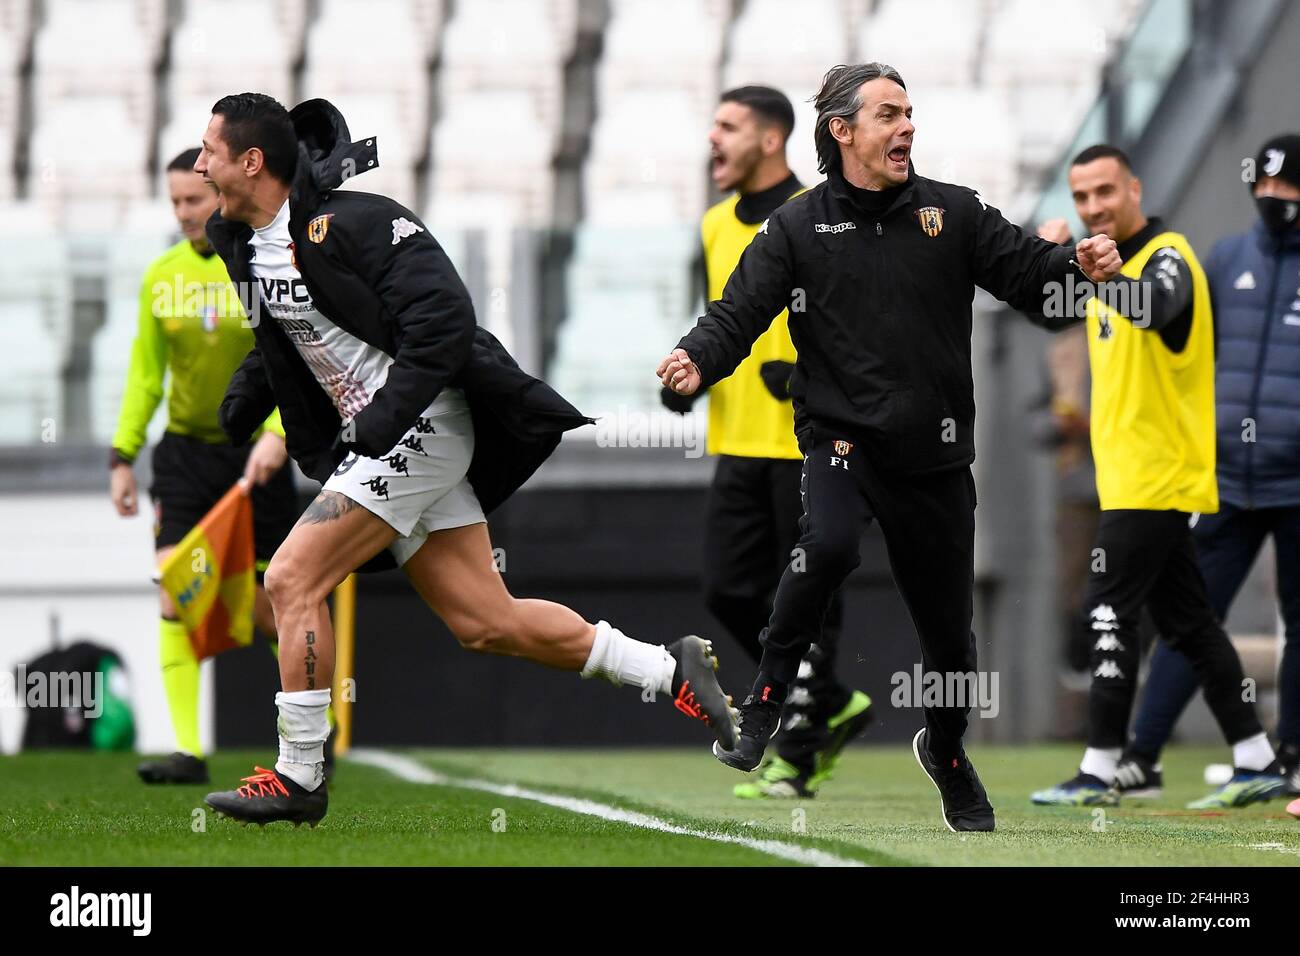 Turin, Italy - 21 March, 2021: Filippo Inzaghi (R), head coach of Benevento Calcio,  and Gianluca Lapadula of Benevento Calcio celebrate the victory at the end of the Serie A football match between Juventus FC and Benevento Calcio. Benevento Calcio won 1-0 over Juventus FC. Credit: Nicolò Campo/Alamy Live News Stock Photo